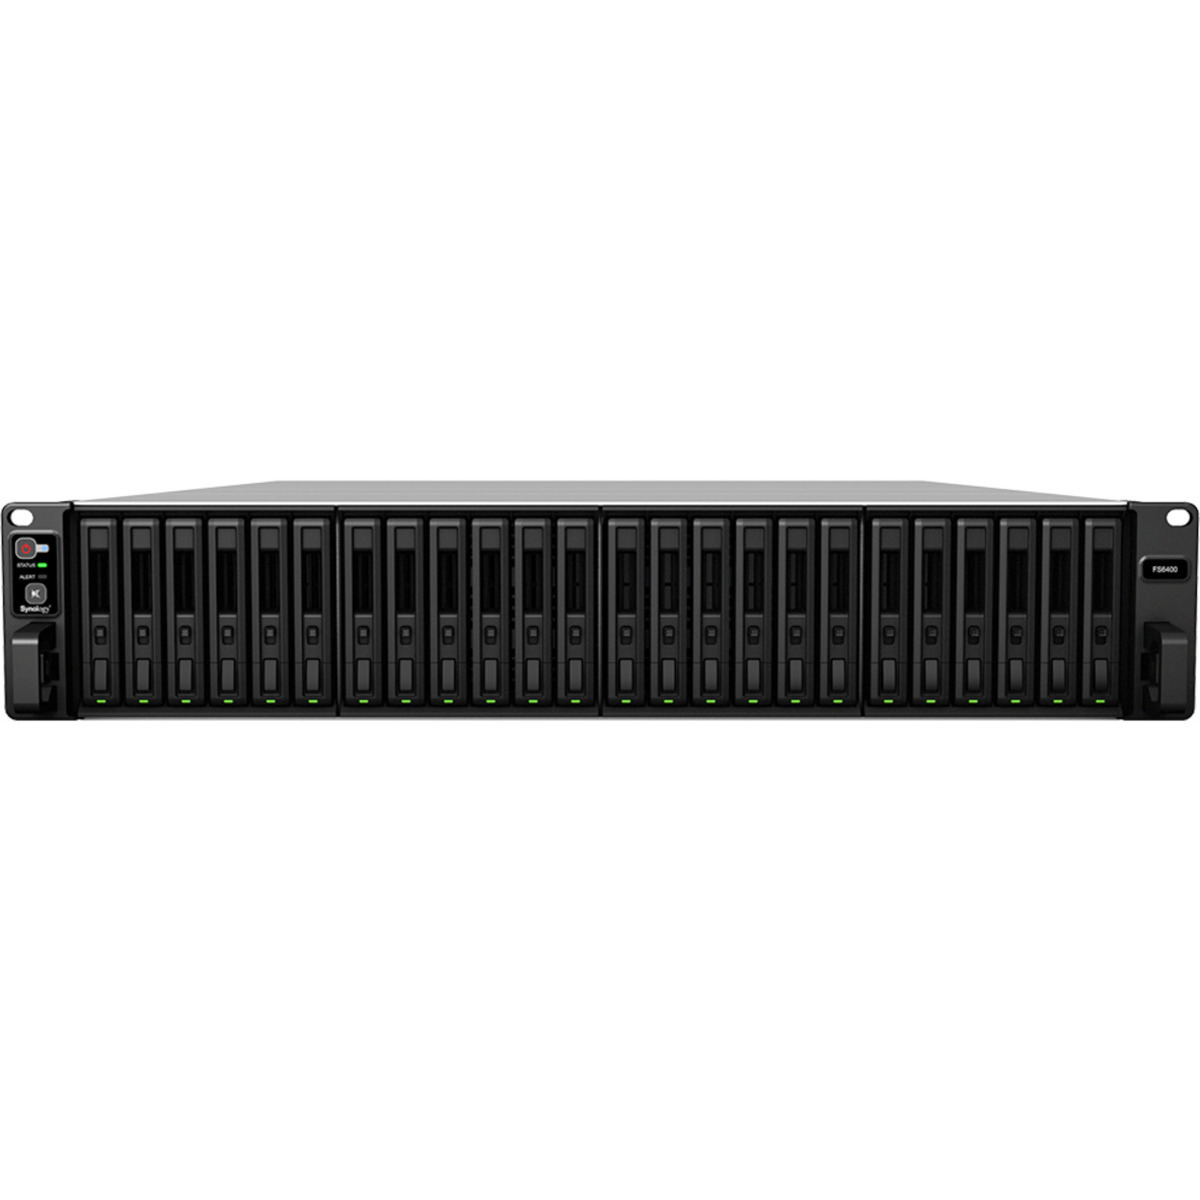 buy $16323 Synology FlashStation FS6400 24tb RackMount NAS - Network Attached Storage Device 24x1000gb Samsung 870 QVO MZ-77Q1T0 2.5 SATA 6Gb/s SSD CONSUMER Class Drives Installed - Burn-In Tested - nas headquarters buy network attached storage server device das new raid-5 free shipping usa FlashStation FS6400